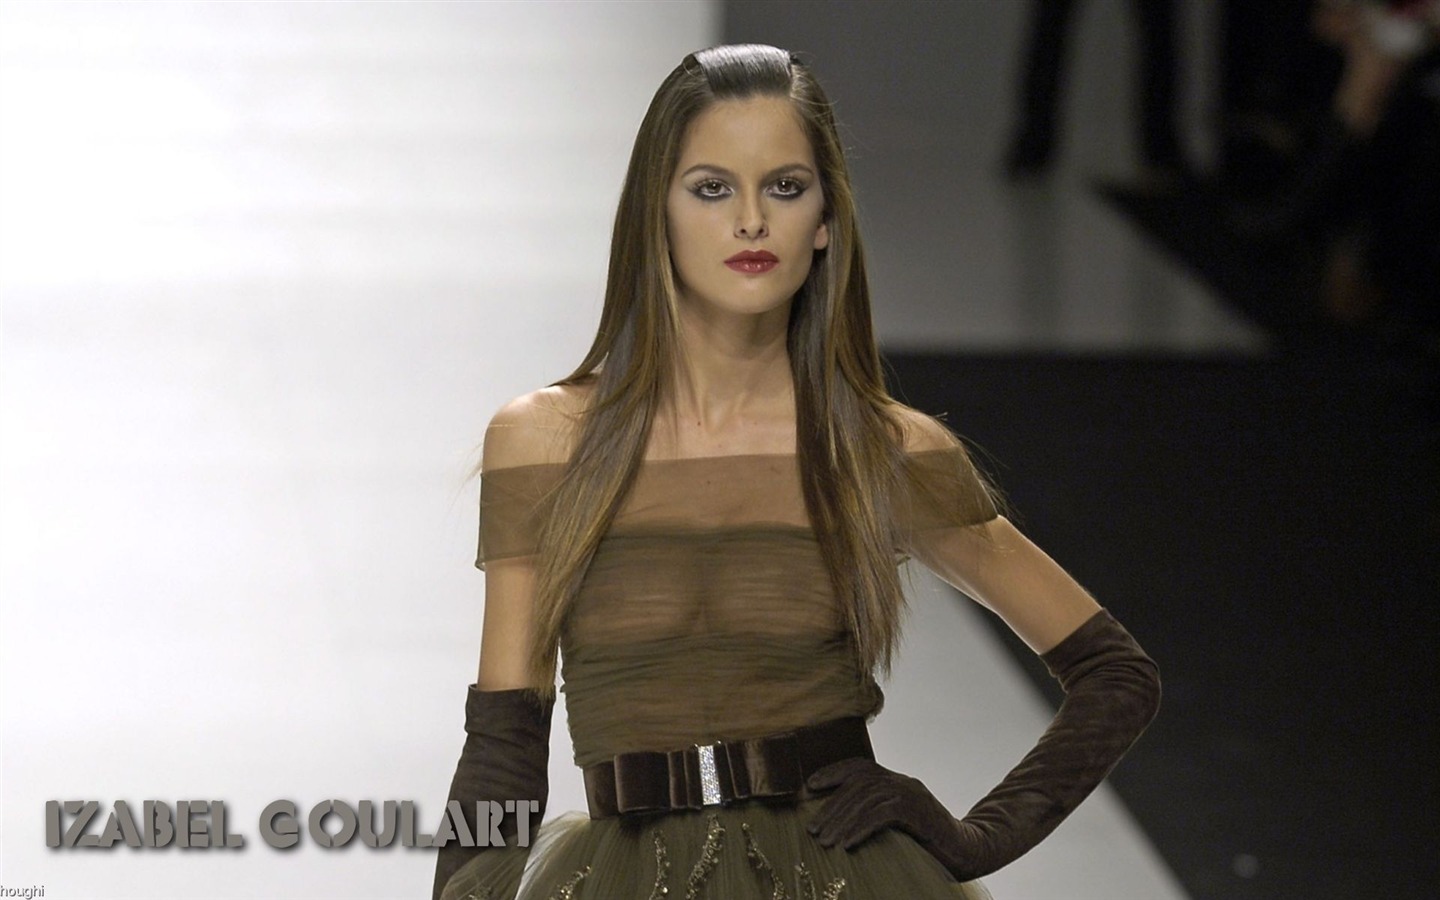 Izabel Goulart #003 - 1440x900 Wallpapers Pictures Photos Images